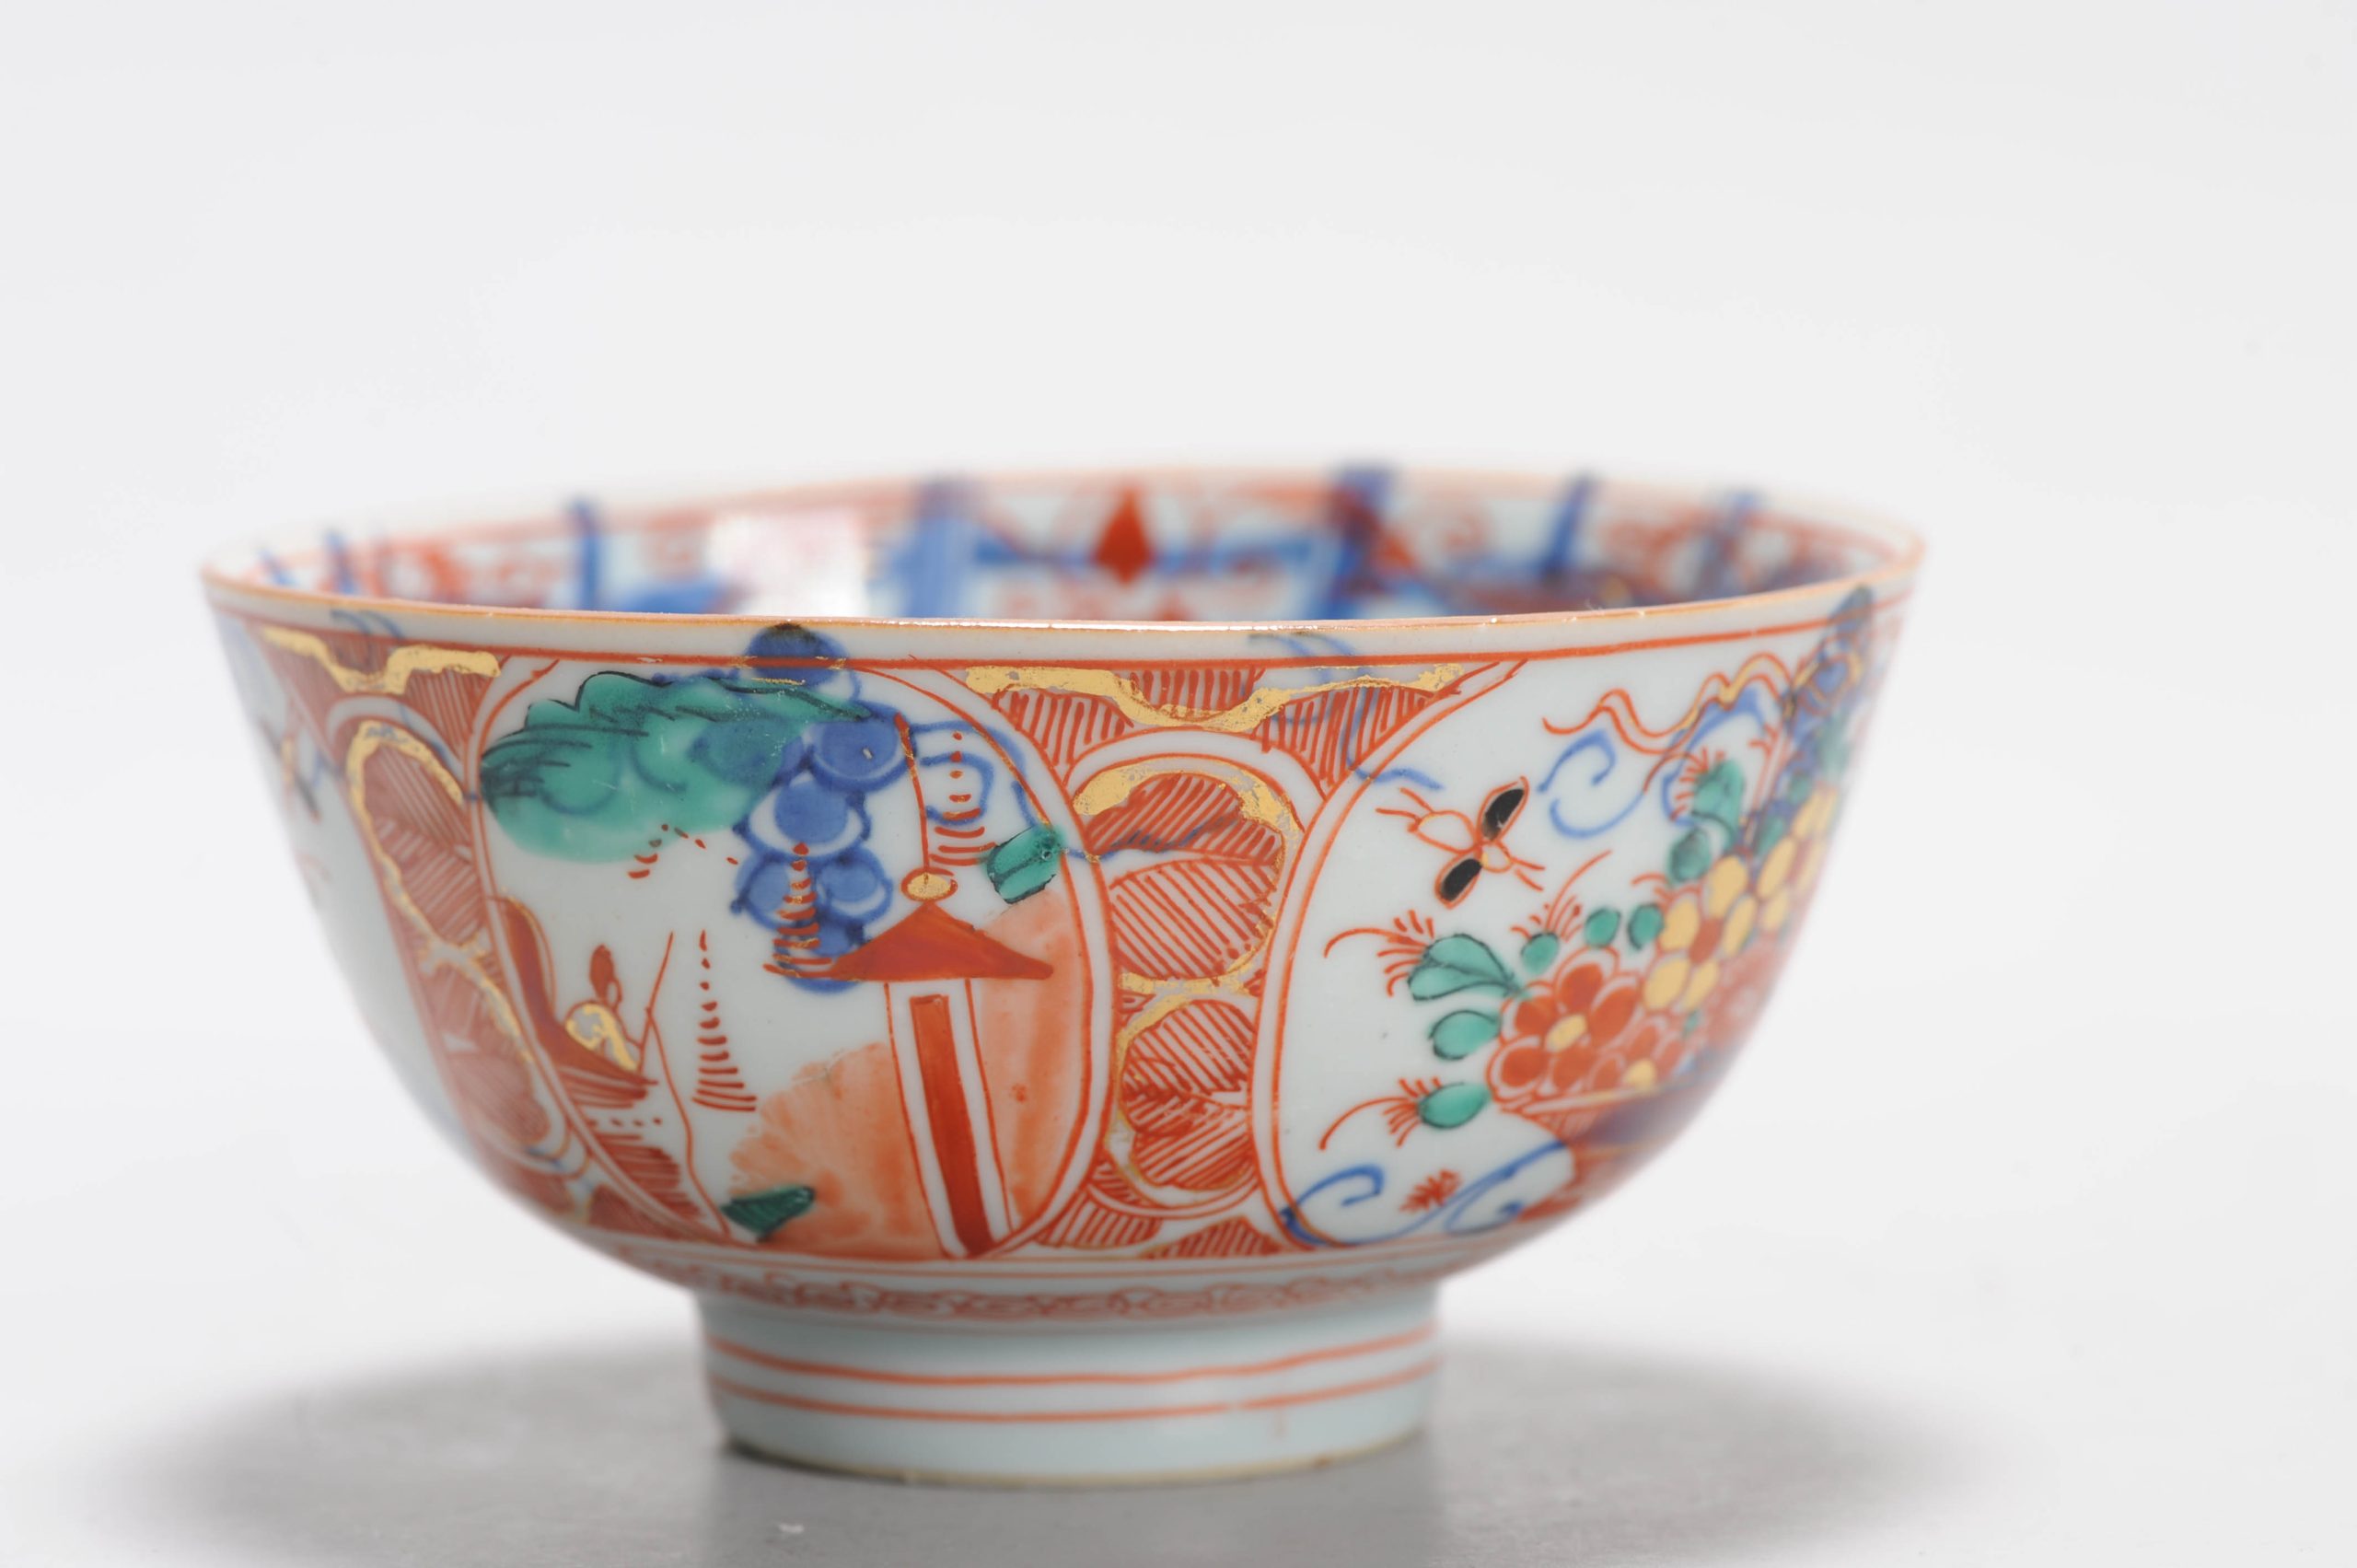 1318 A Lovely Bowl Painted in Europe on a Chinese Blue and White Bowl Amsterdam Bont